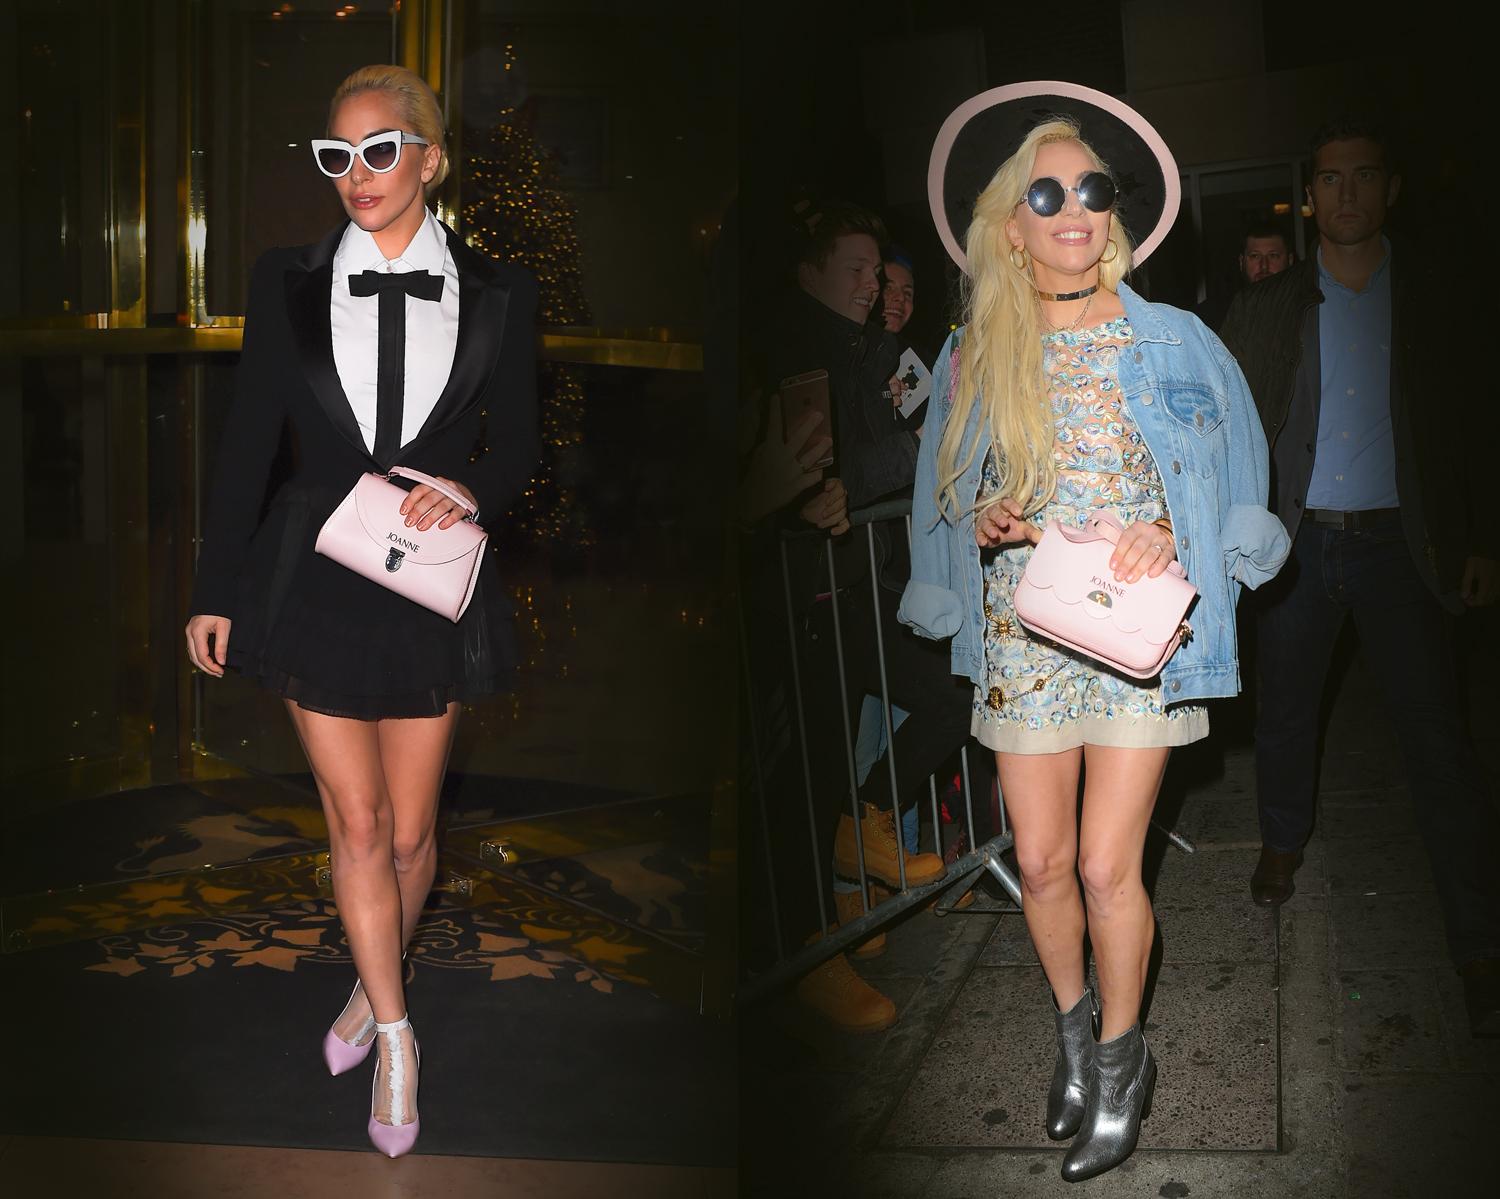 CSCSpotted Lady Gaga Carrying CSC - The Cambridge Satchel Company EU Store